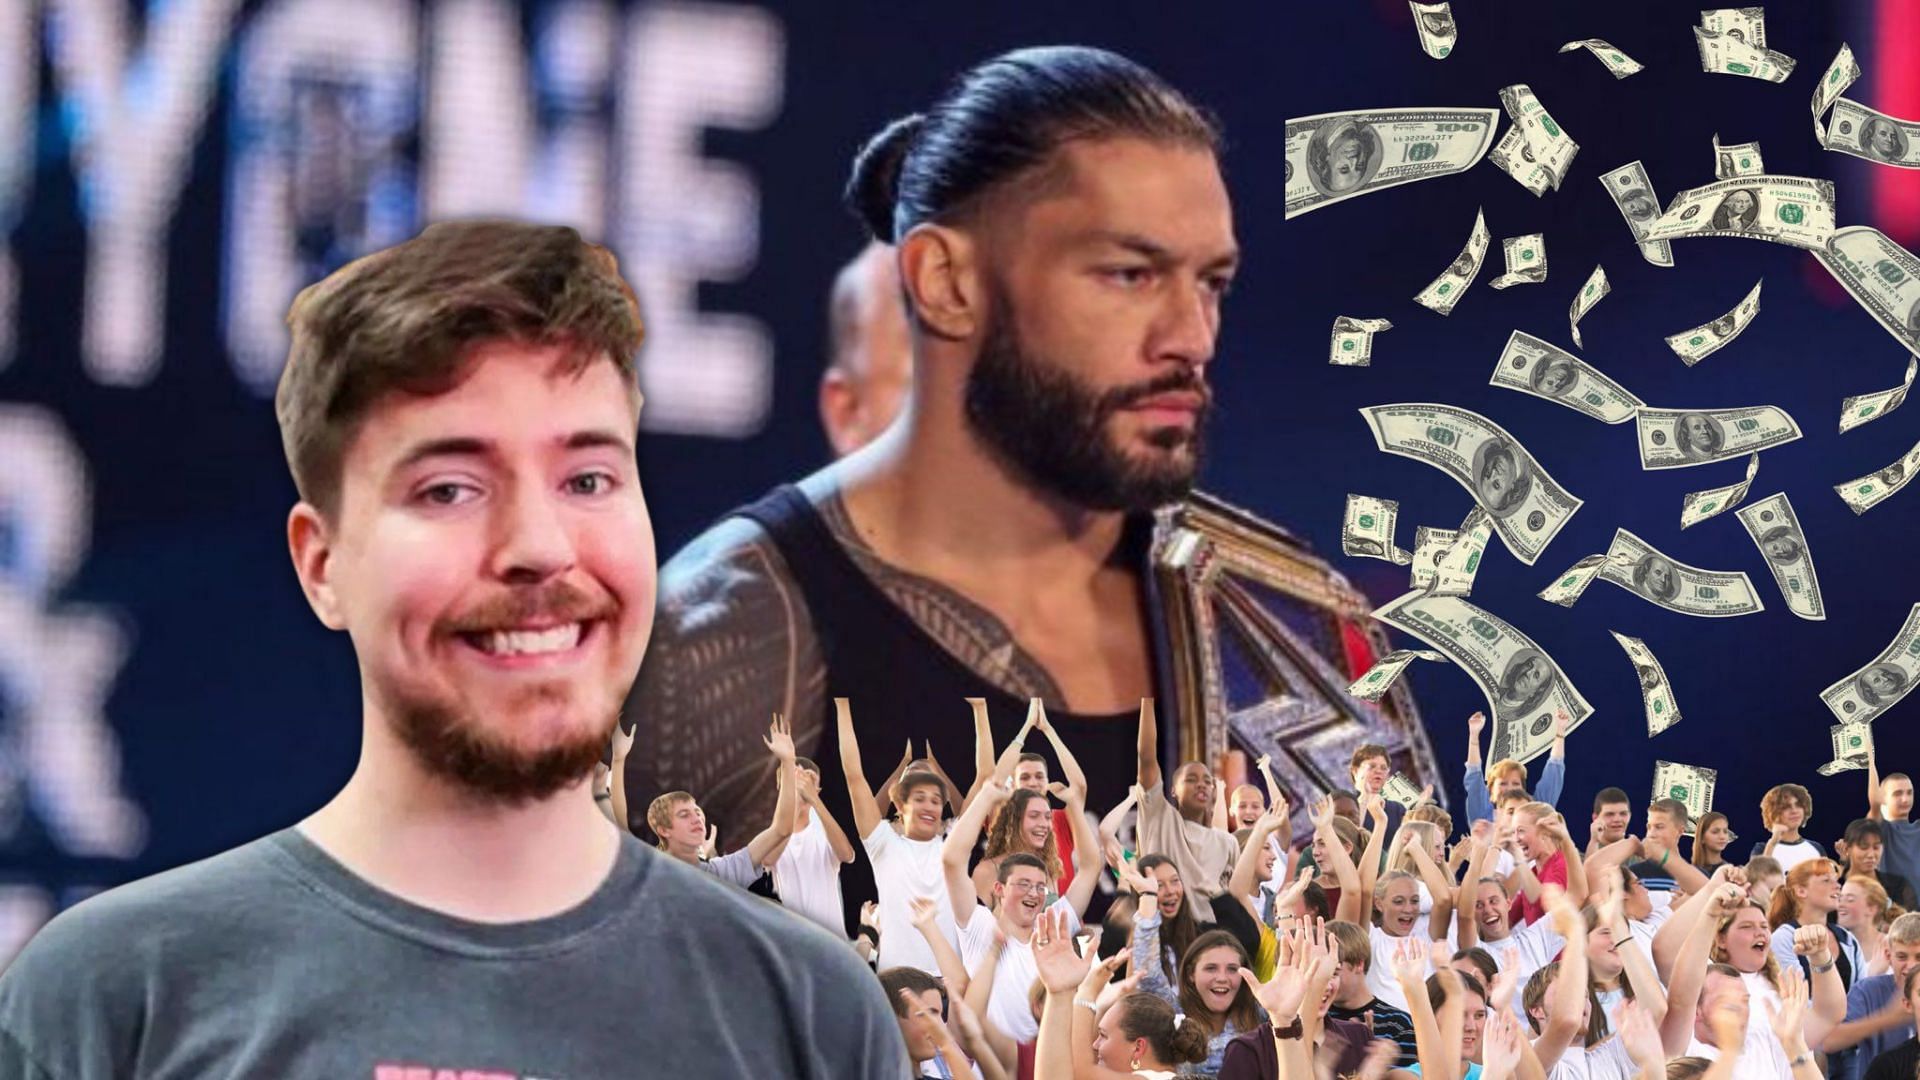 Roman Reigns called out several YouTubers during his match with Logan Paul